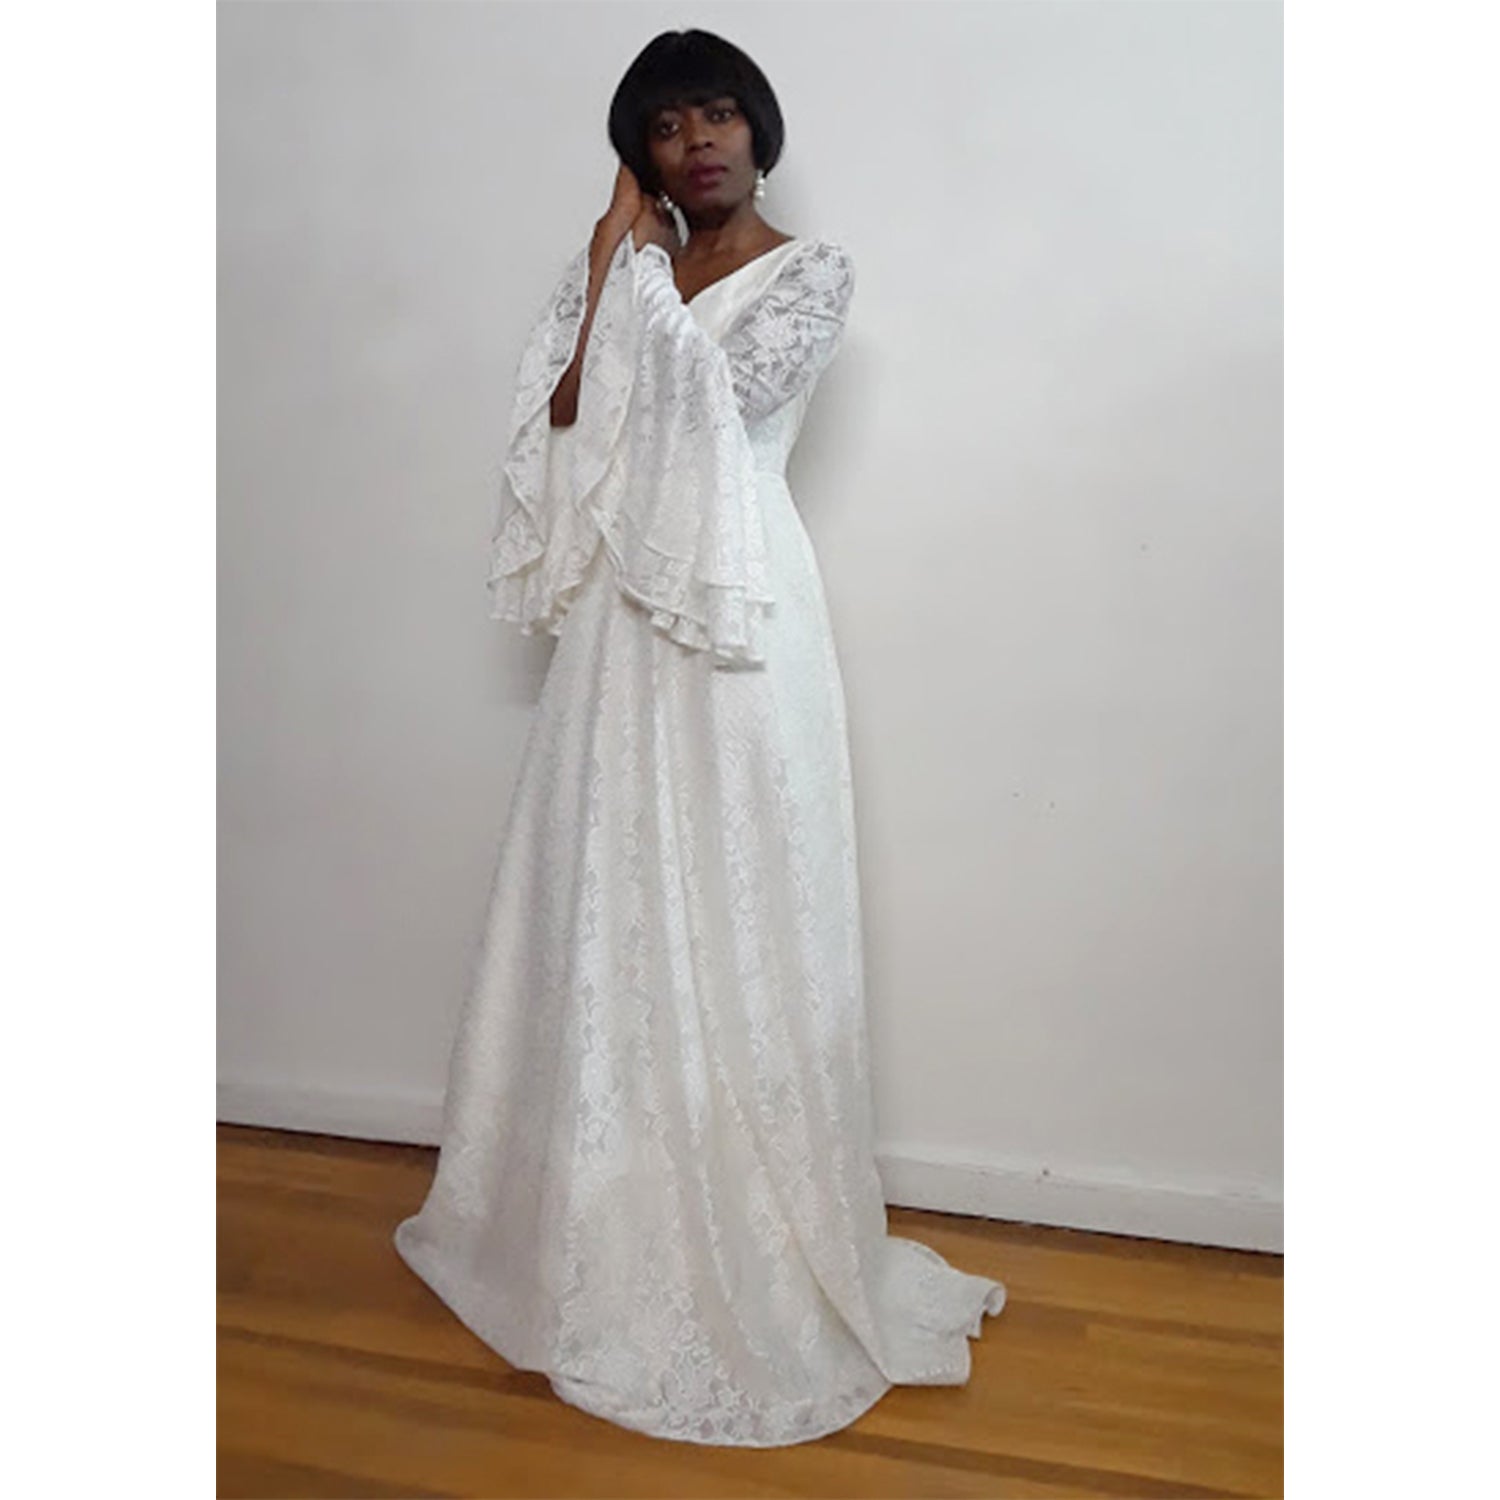 Lorna- Long Bell Sleeves Off White V-Shape Neckline  Lace Bridal Gown